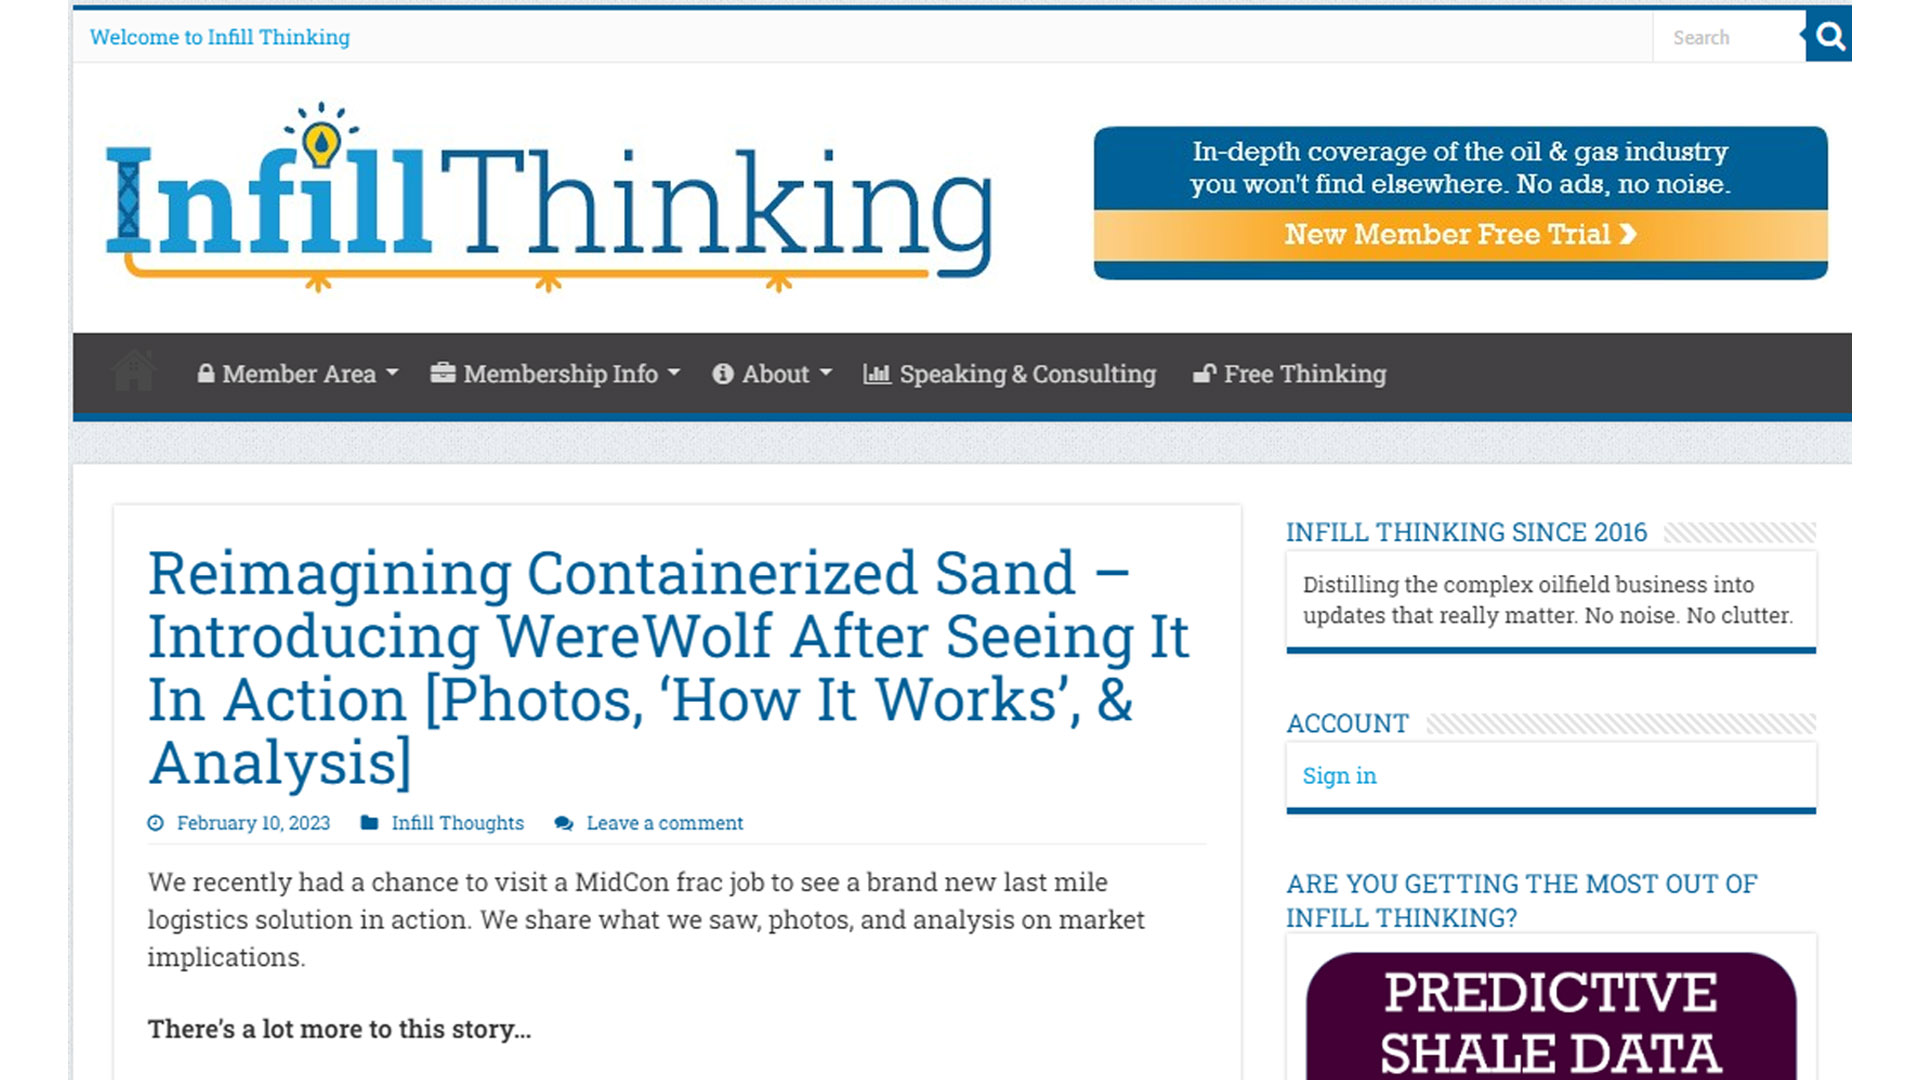 Infill Thinking WereWolf Systems Article - Reimagining Containerized Sand